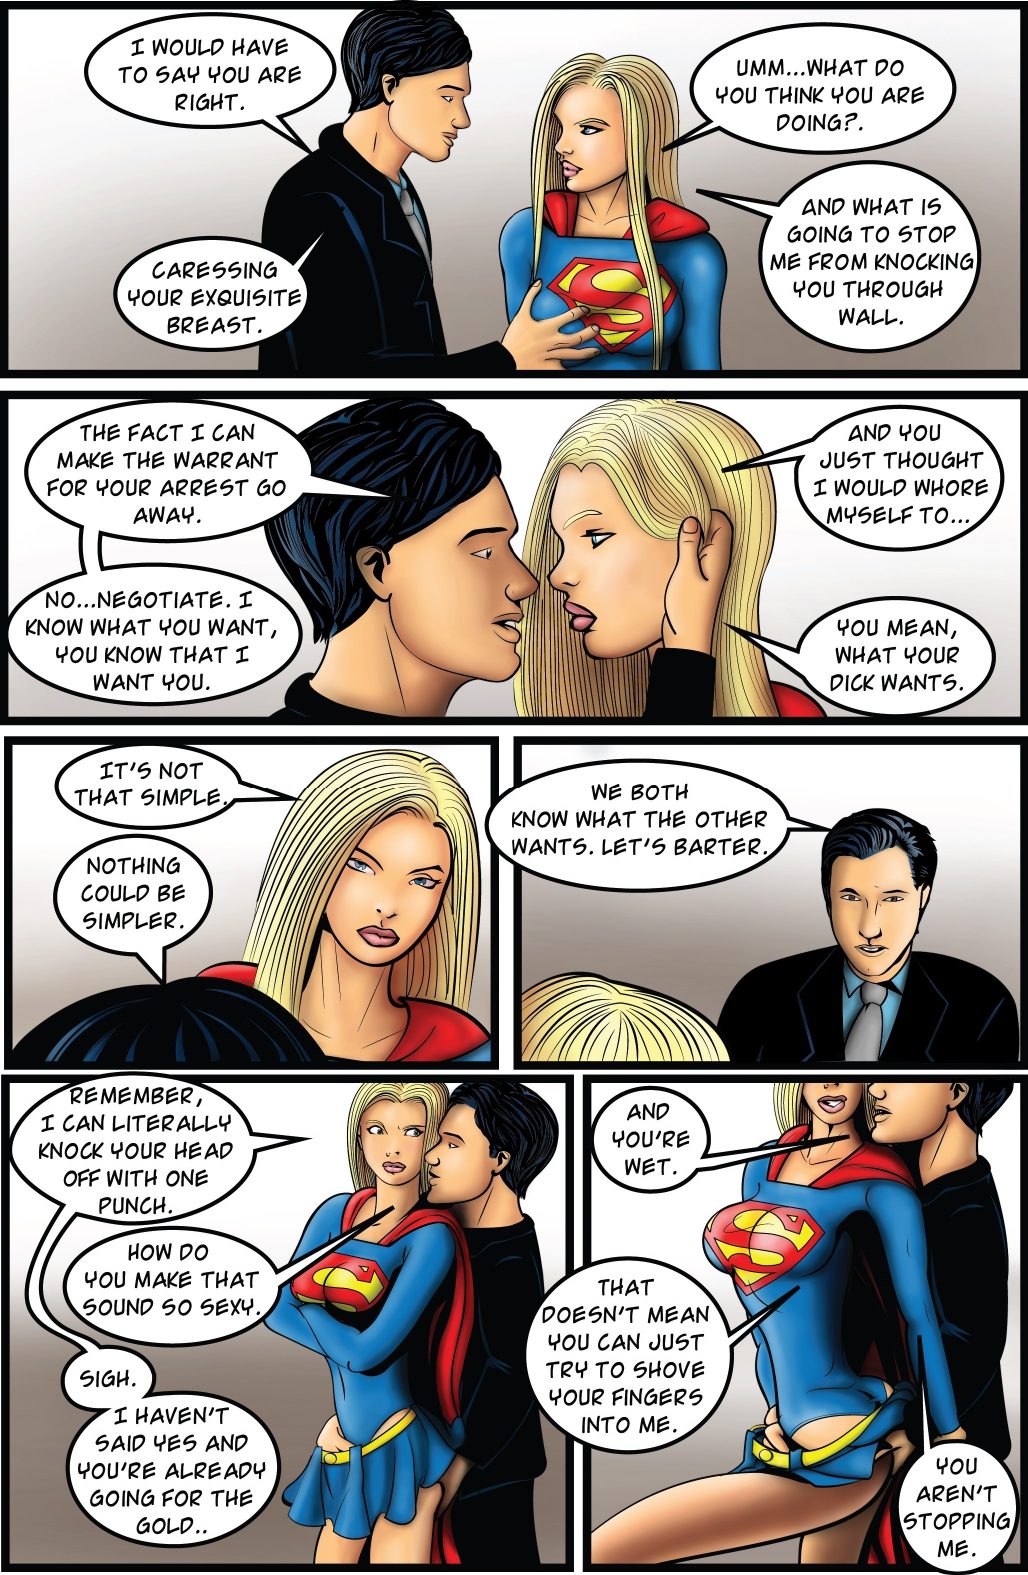 Supergirl: Issue 8 – Countdown to Extinction Part 1 by Roderick Swawyki